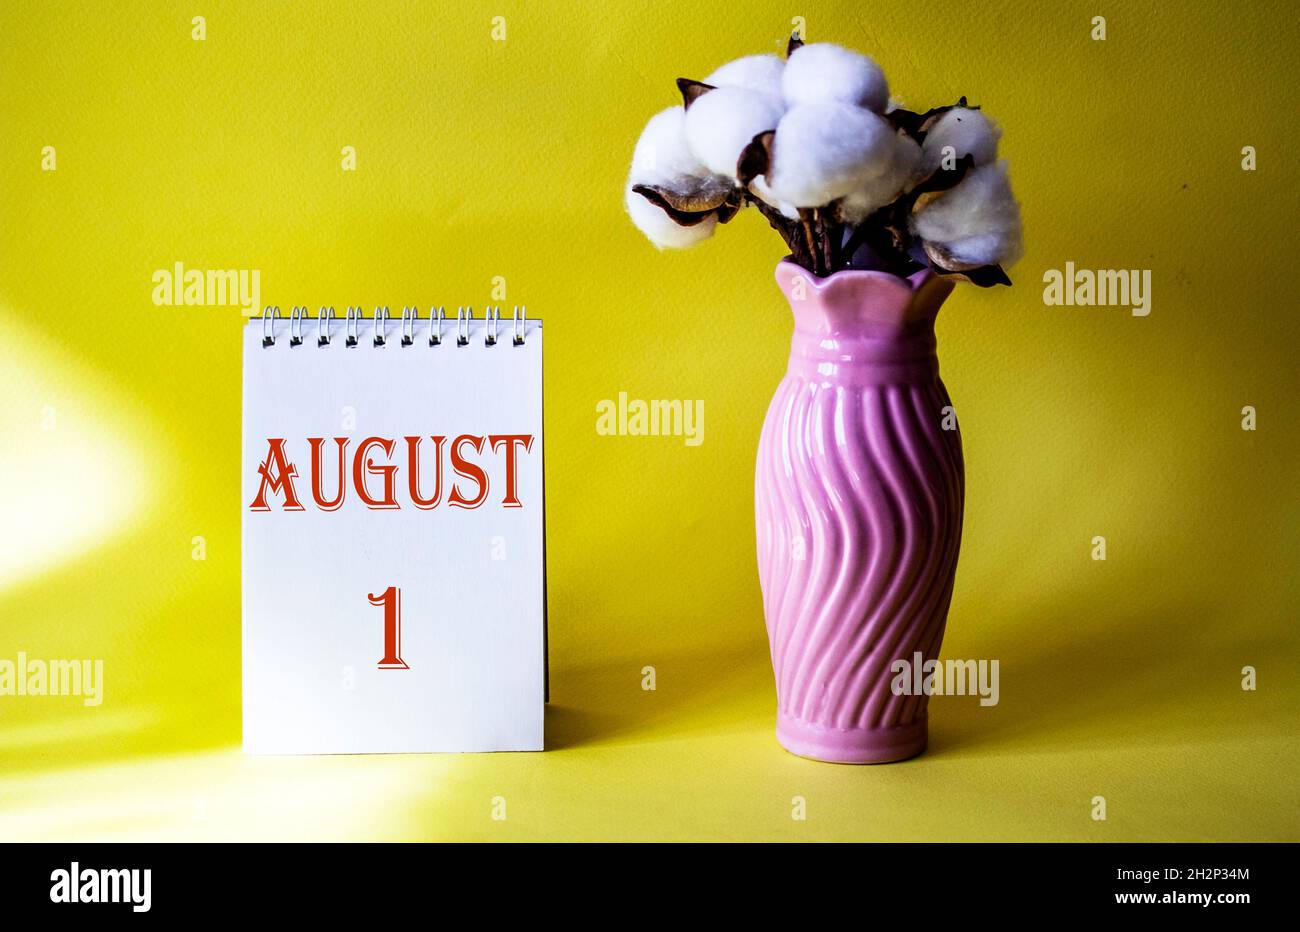 Calendar with text 1 august on yellow background and with a vase of flowers Stock Photo